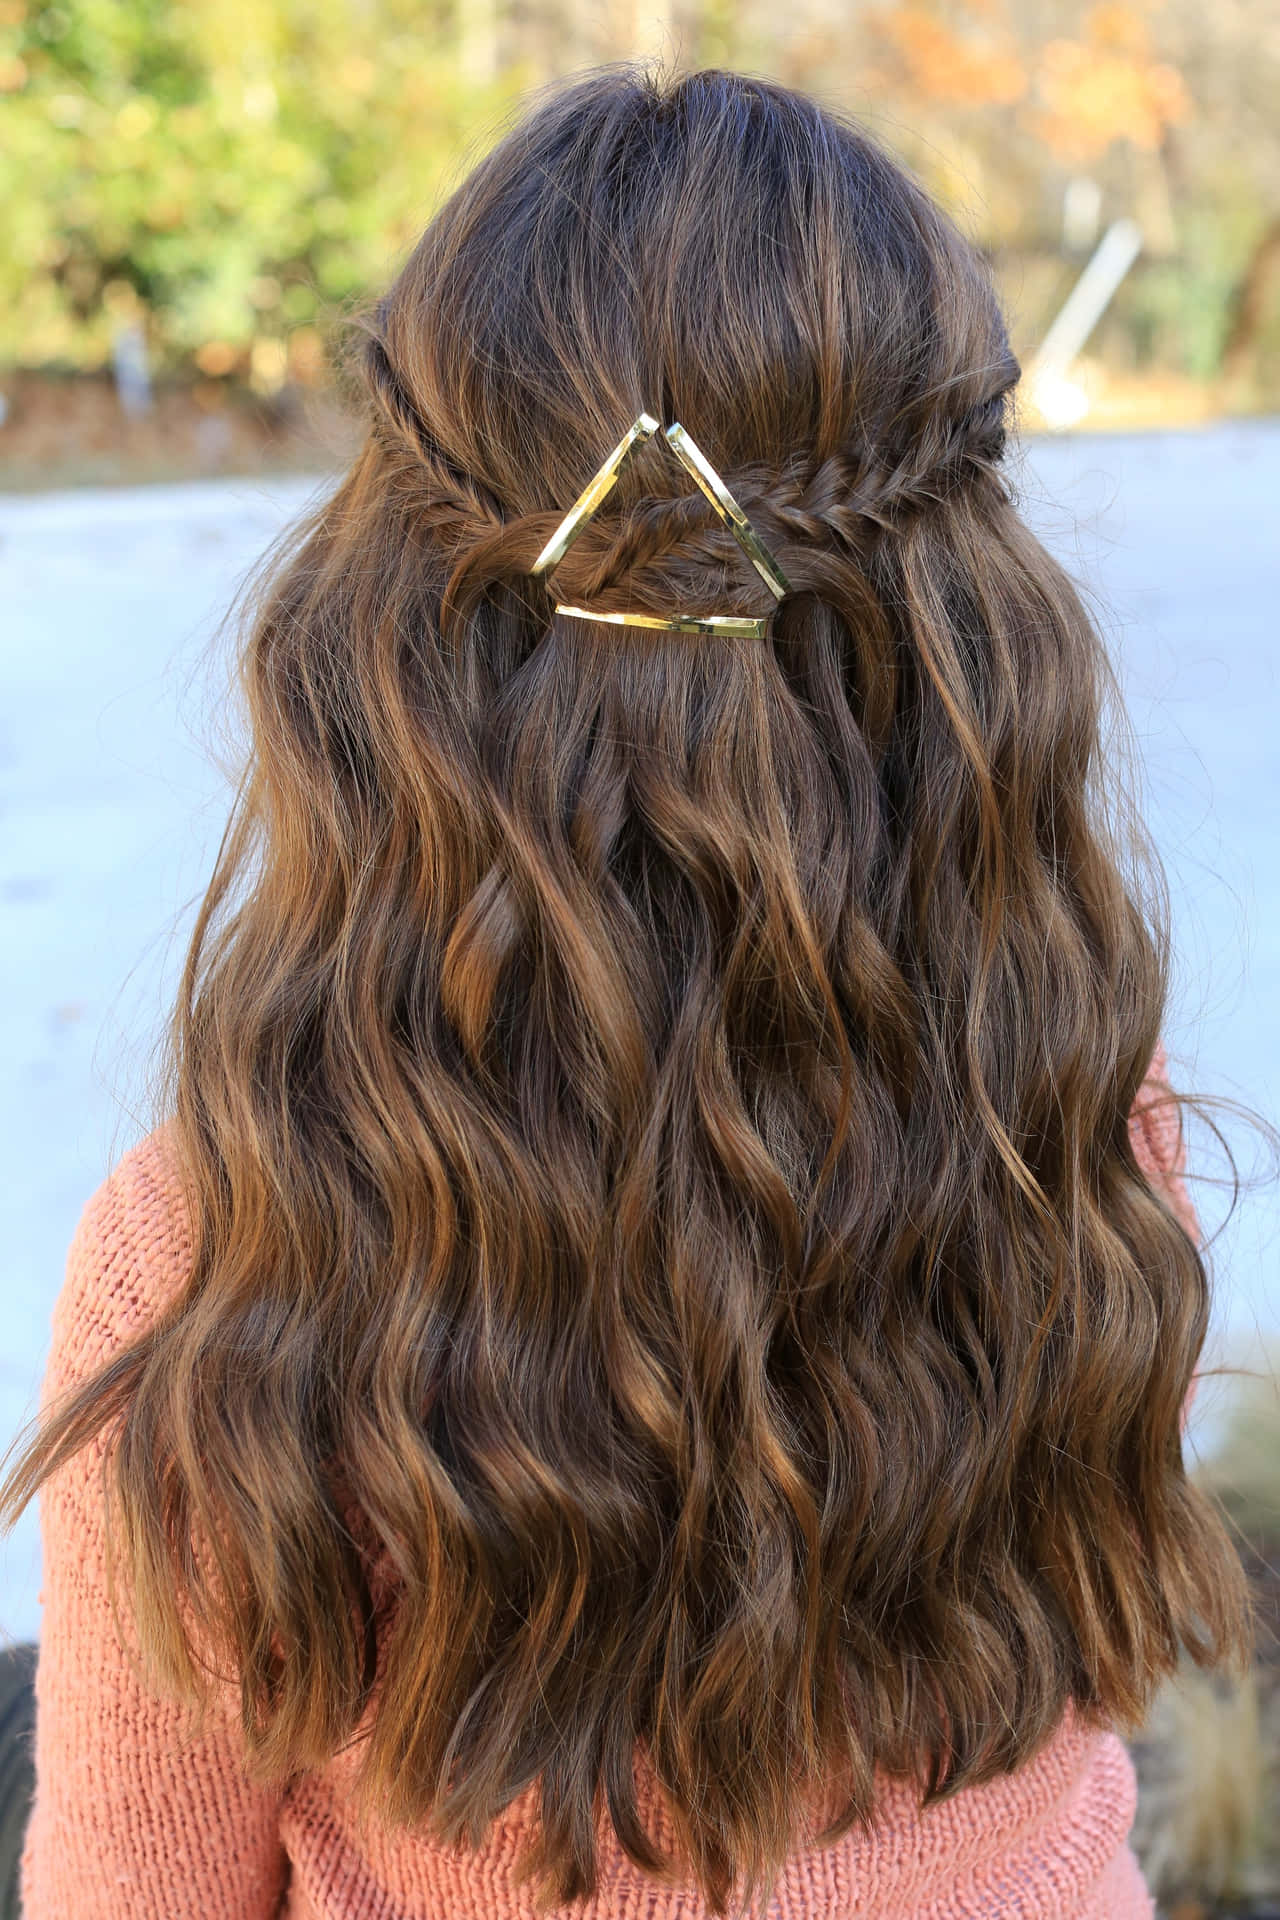 Give your look a sweet twist with this cute hairstyle!"